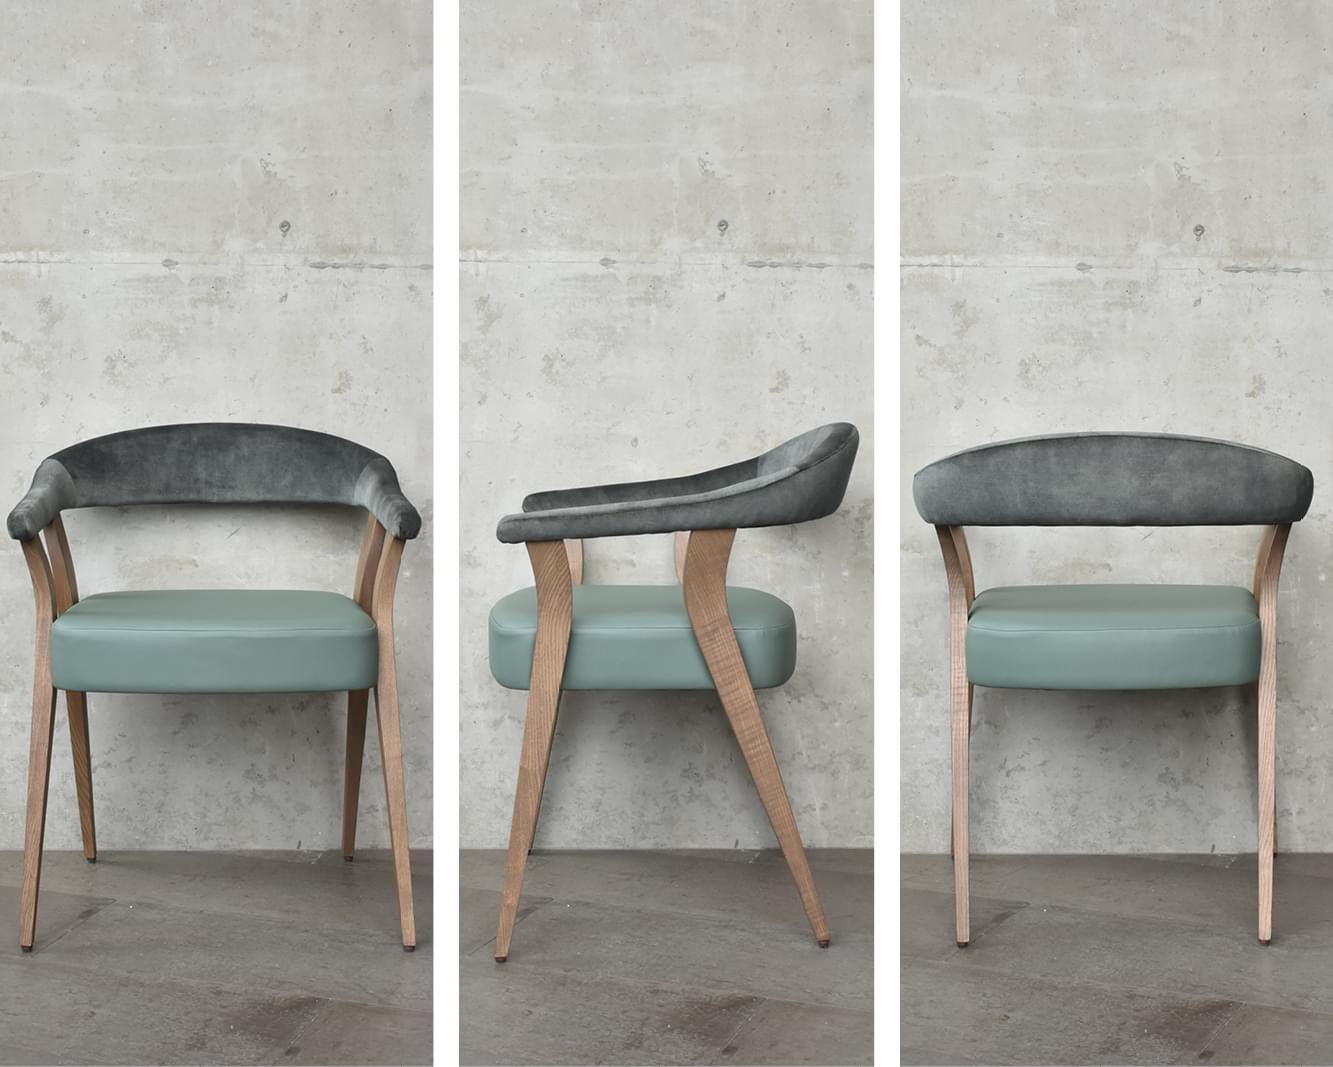 Nannini armchair - New fully upholstered furniture for fine dining restaurants as seen at the Salone del Mobile Milano April, 2019